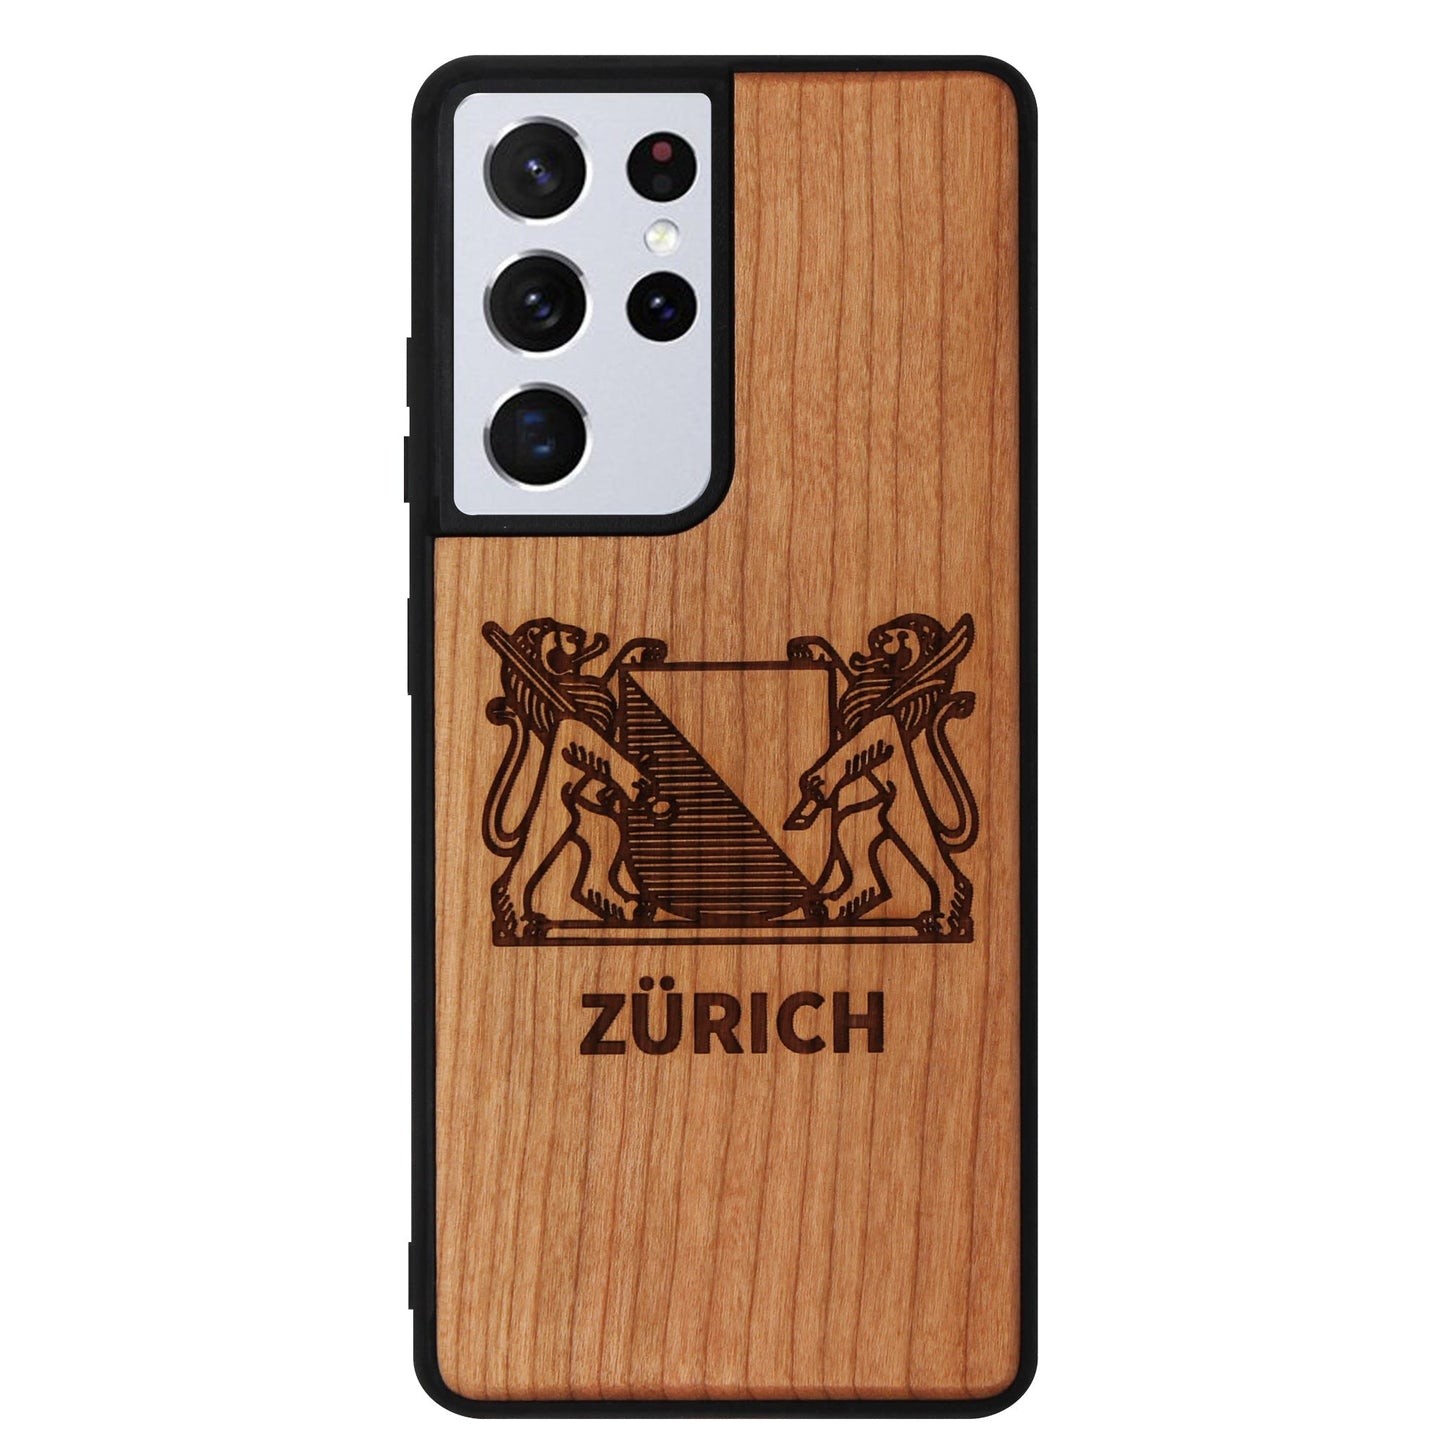 Zurich coat of arms Eden case made of cherry wood for Samsung Galaxy S21 Ultra